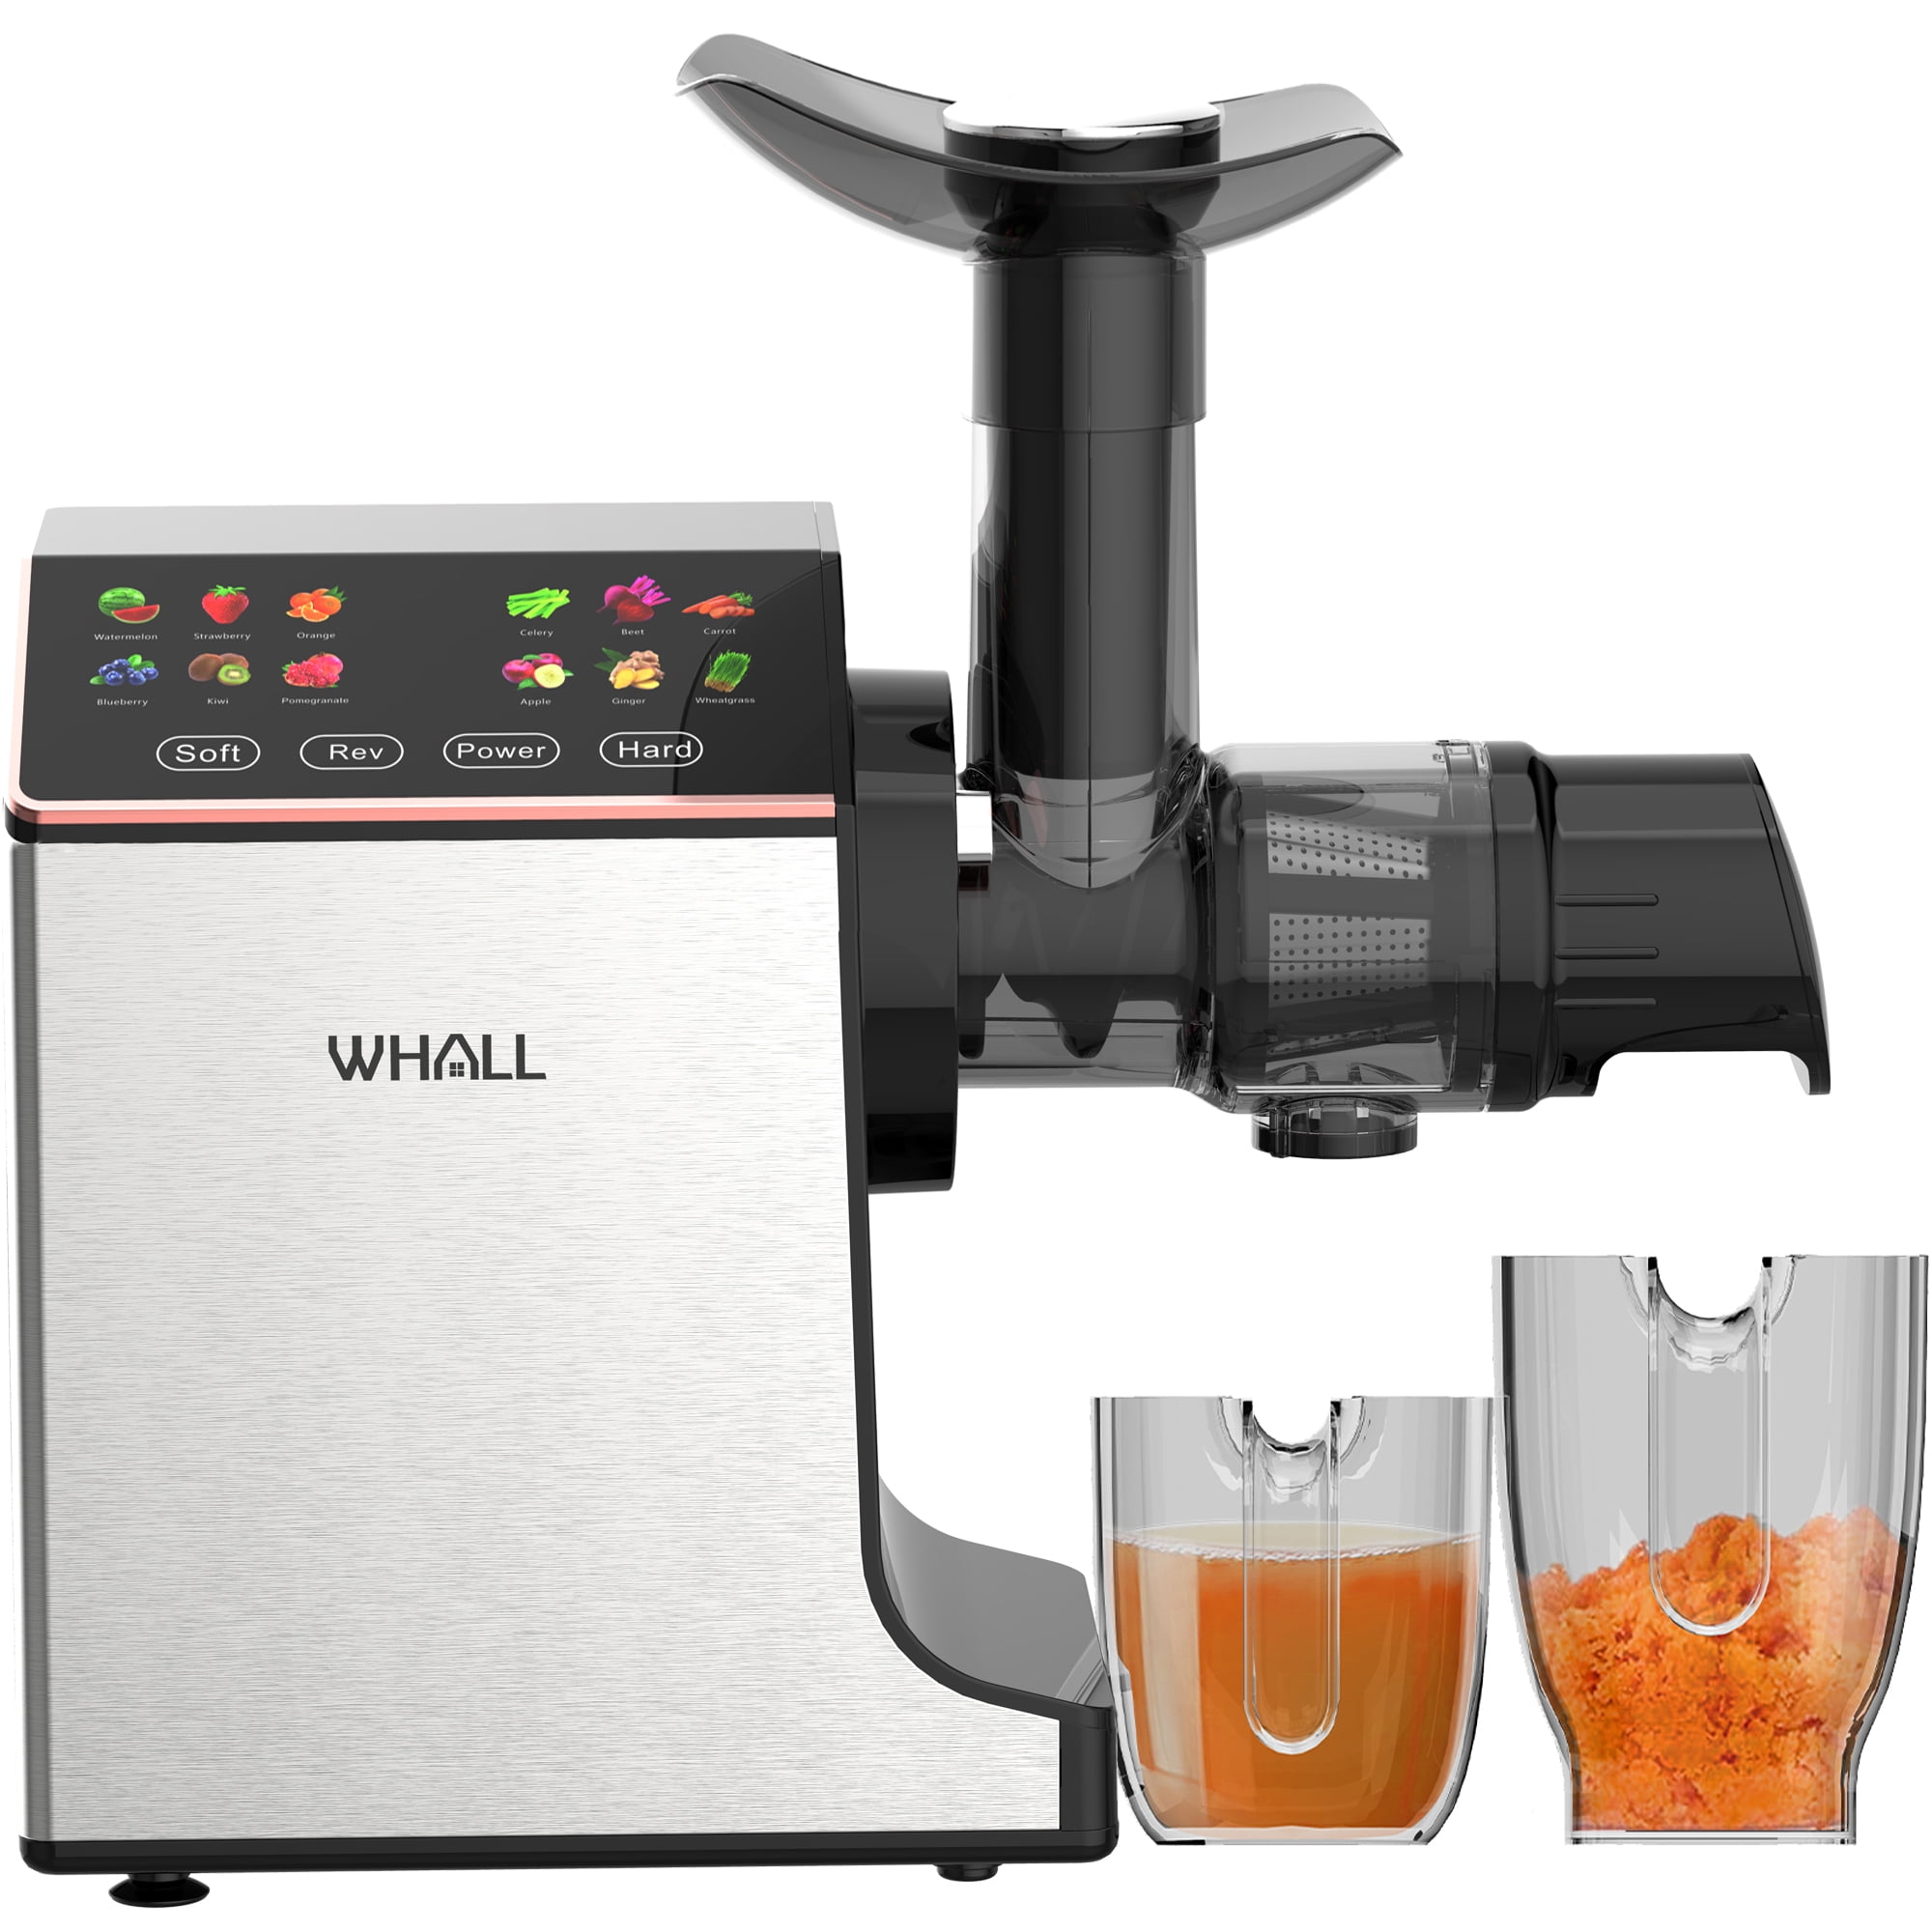 WHALL Slow Masticating Cold Press Juicer Machine with Touchscreen, Reverse Function